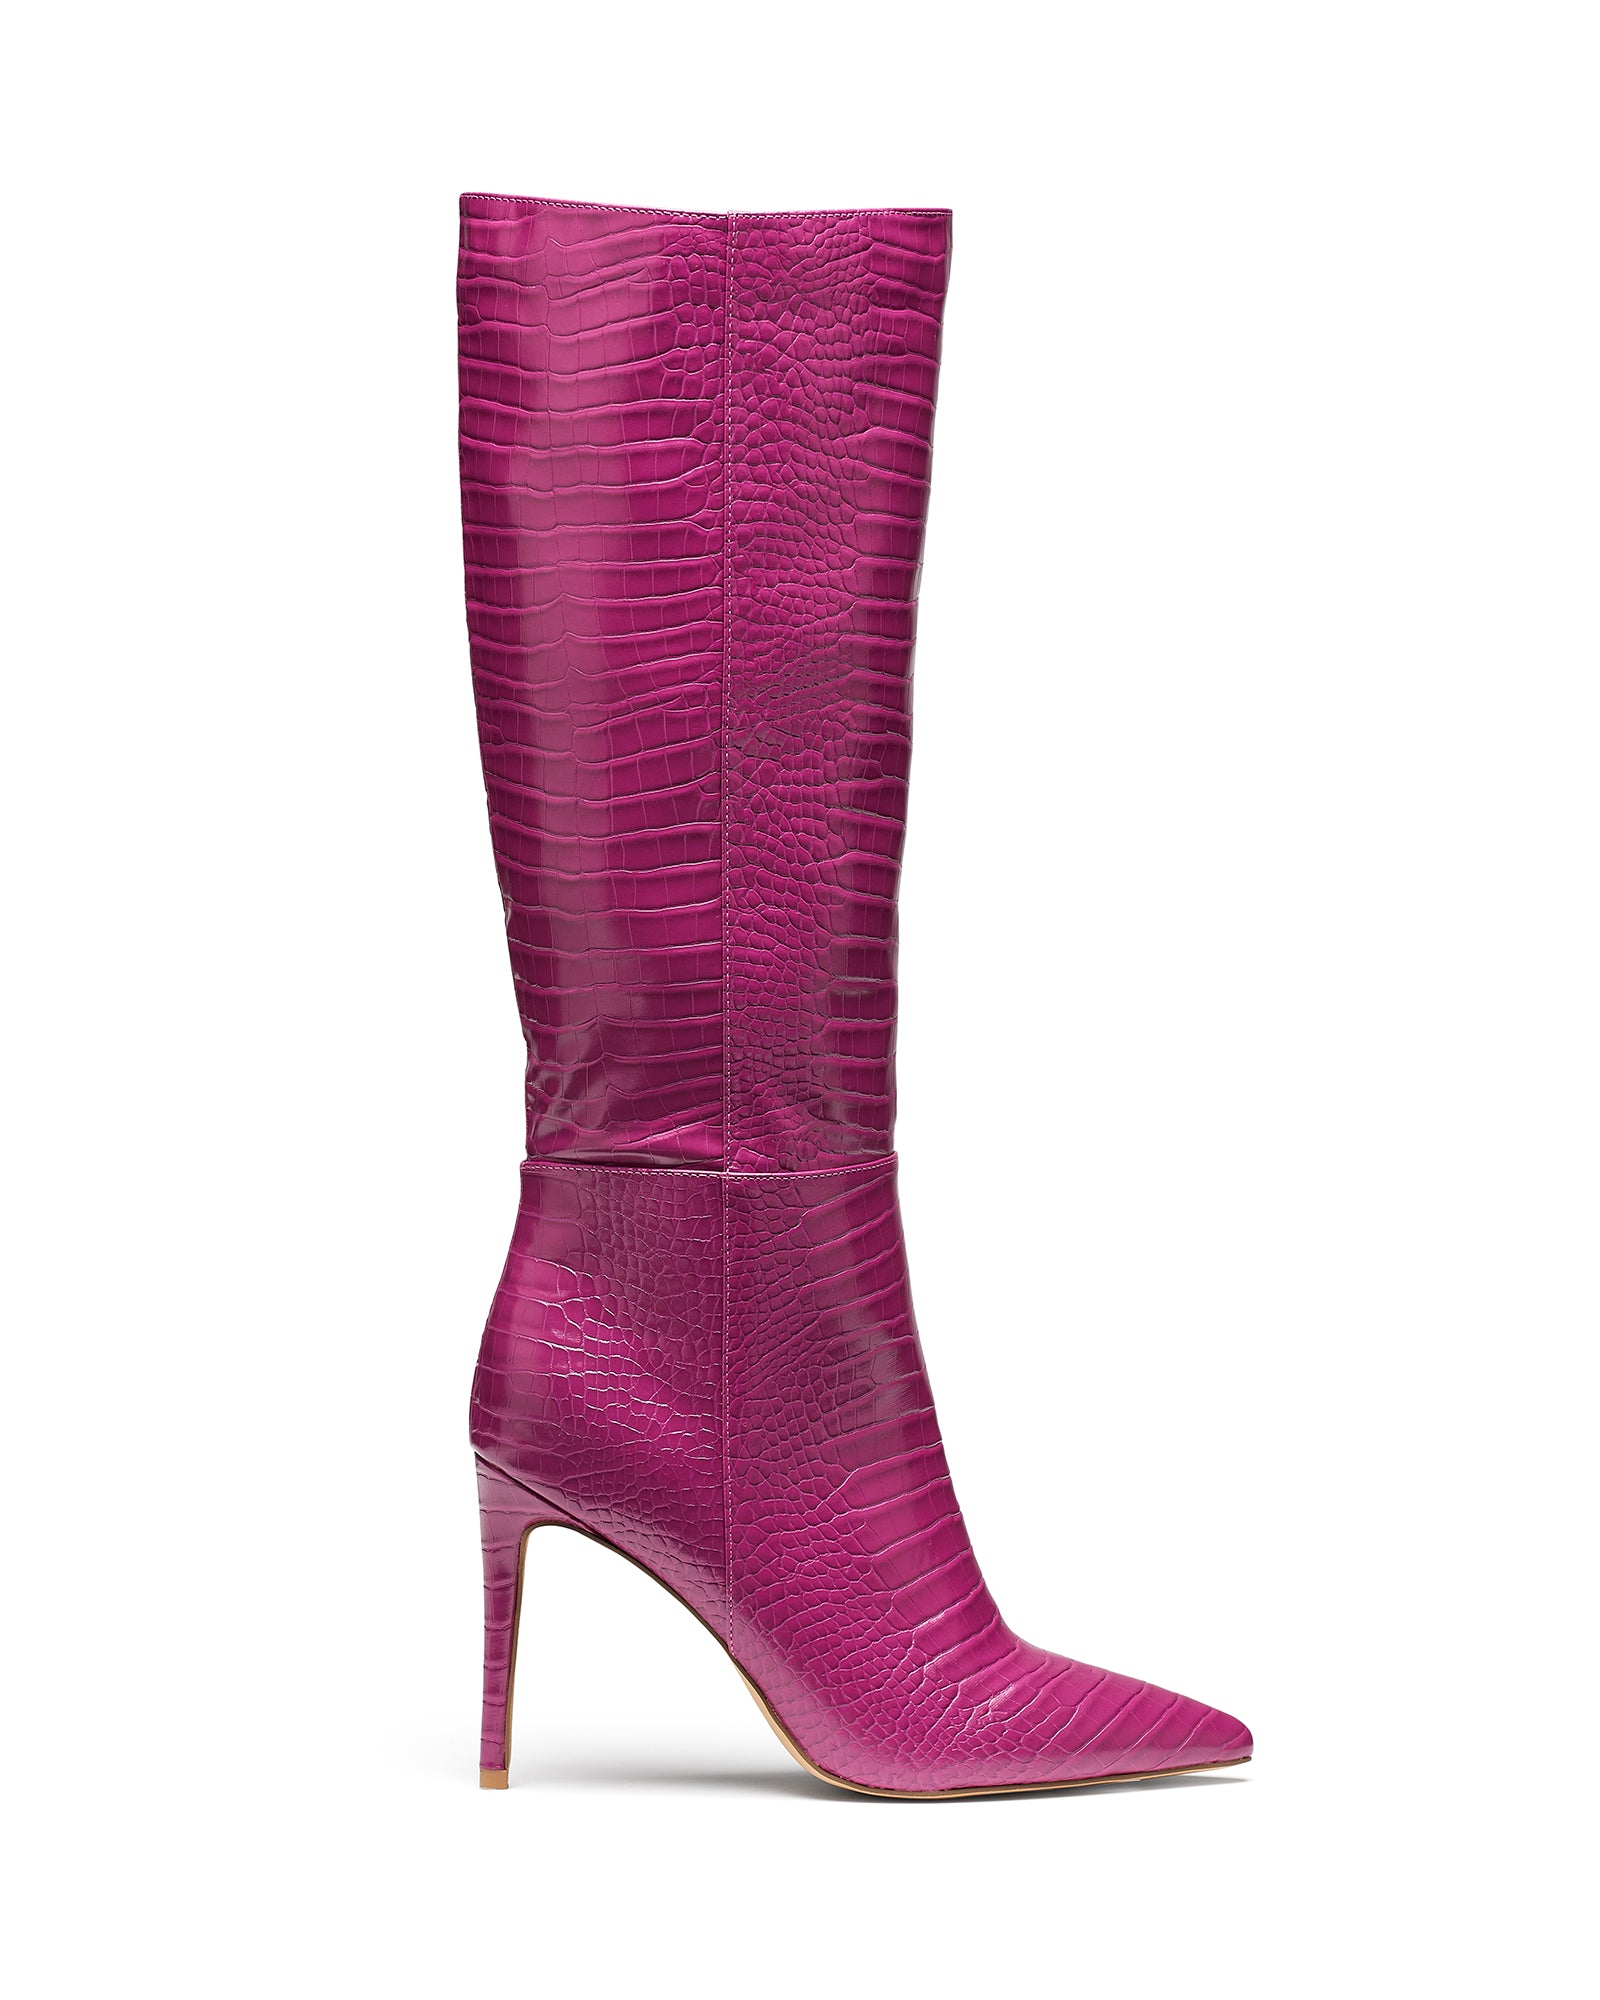 Therapy Shoes Icon Grape Croc | Women's Boots | Tall | Knee High